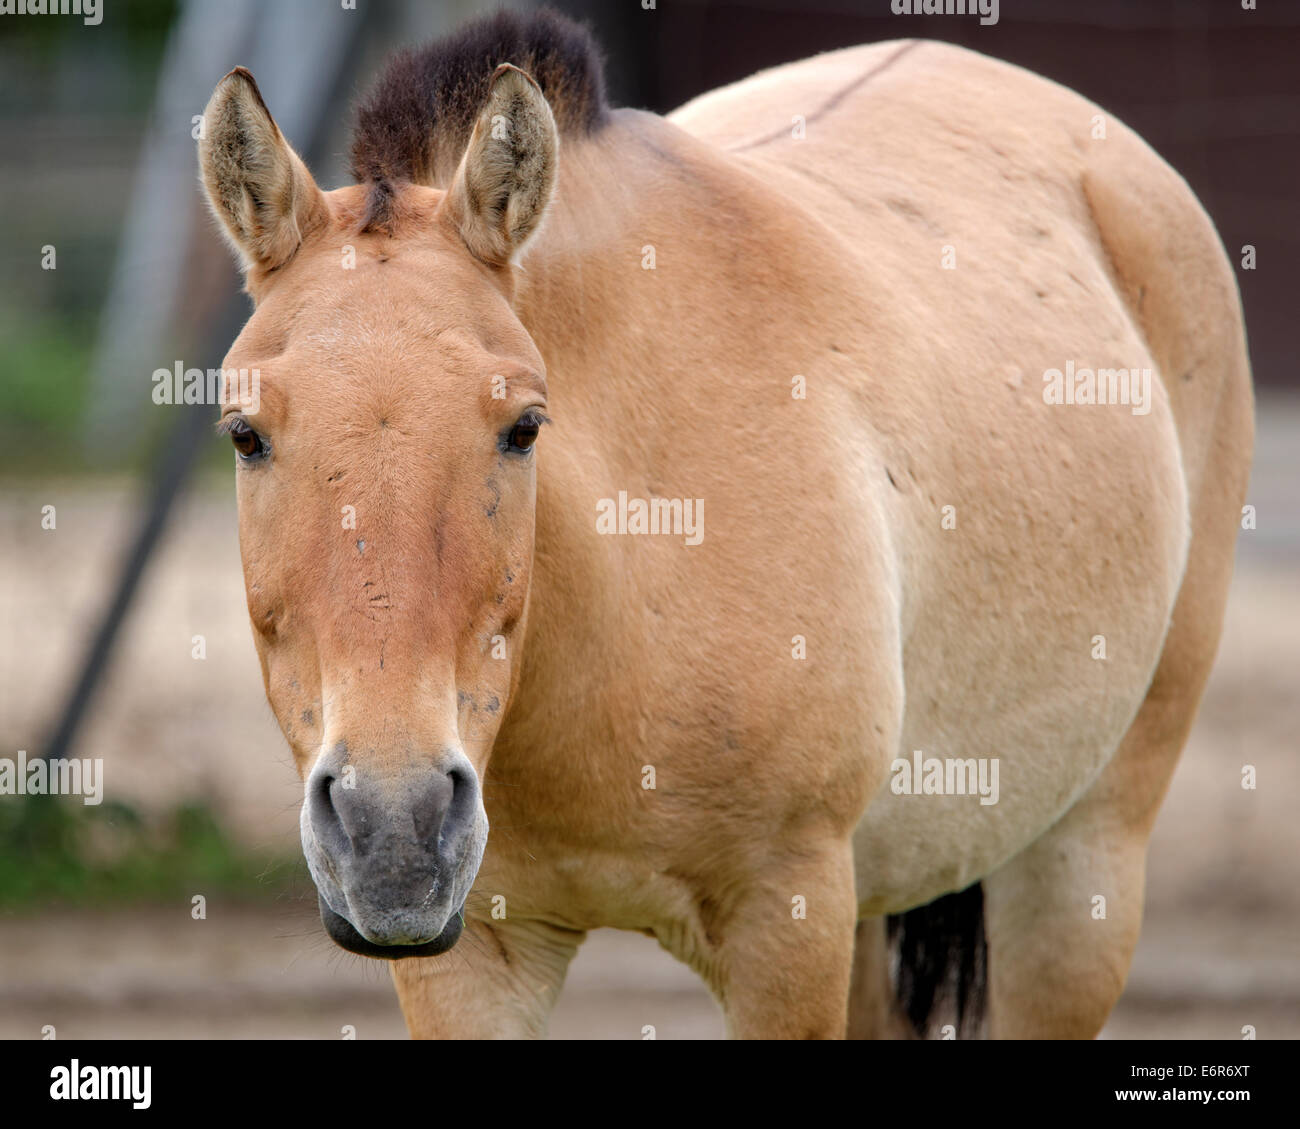 Przewalski's horse or Dzungarian horse, is a rare and endangered subspecies of wild horse (Equus ferus). Stock Photo